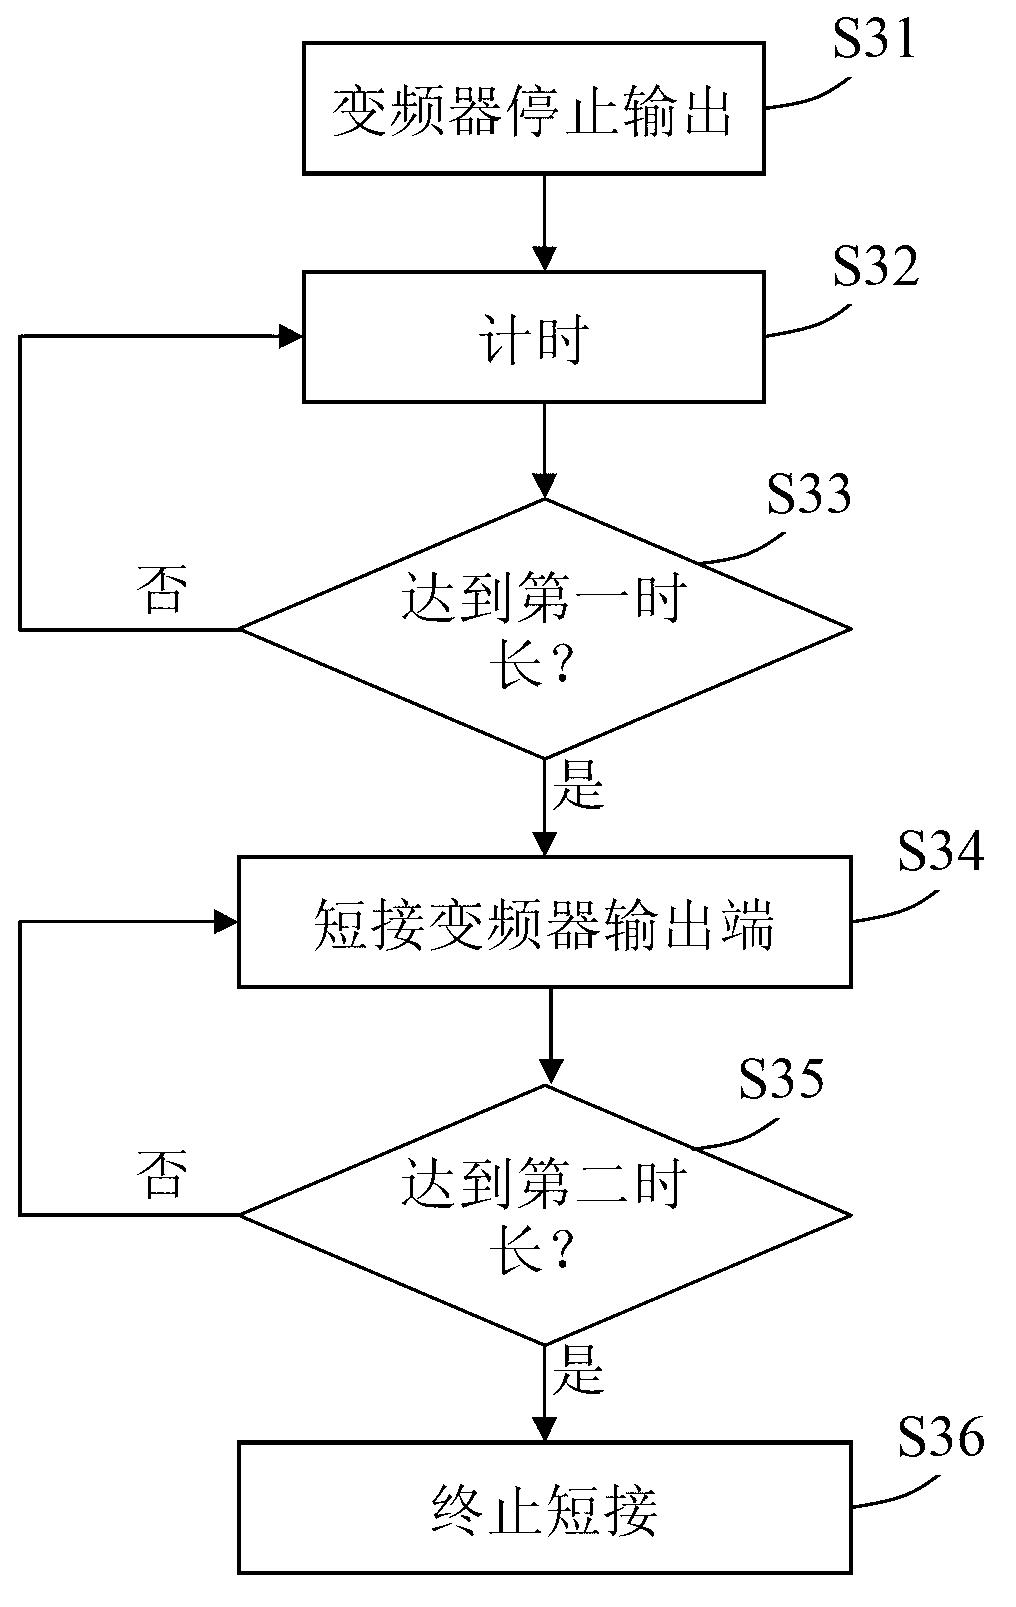 Conical motor stop brake system and method